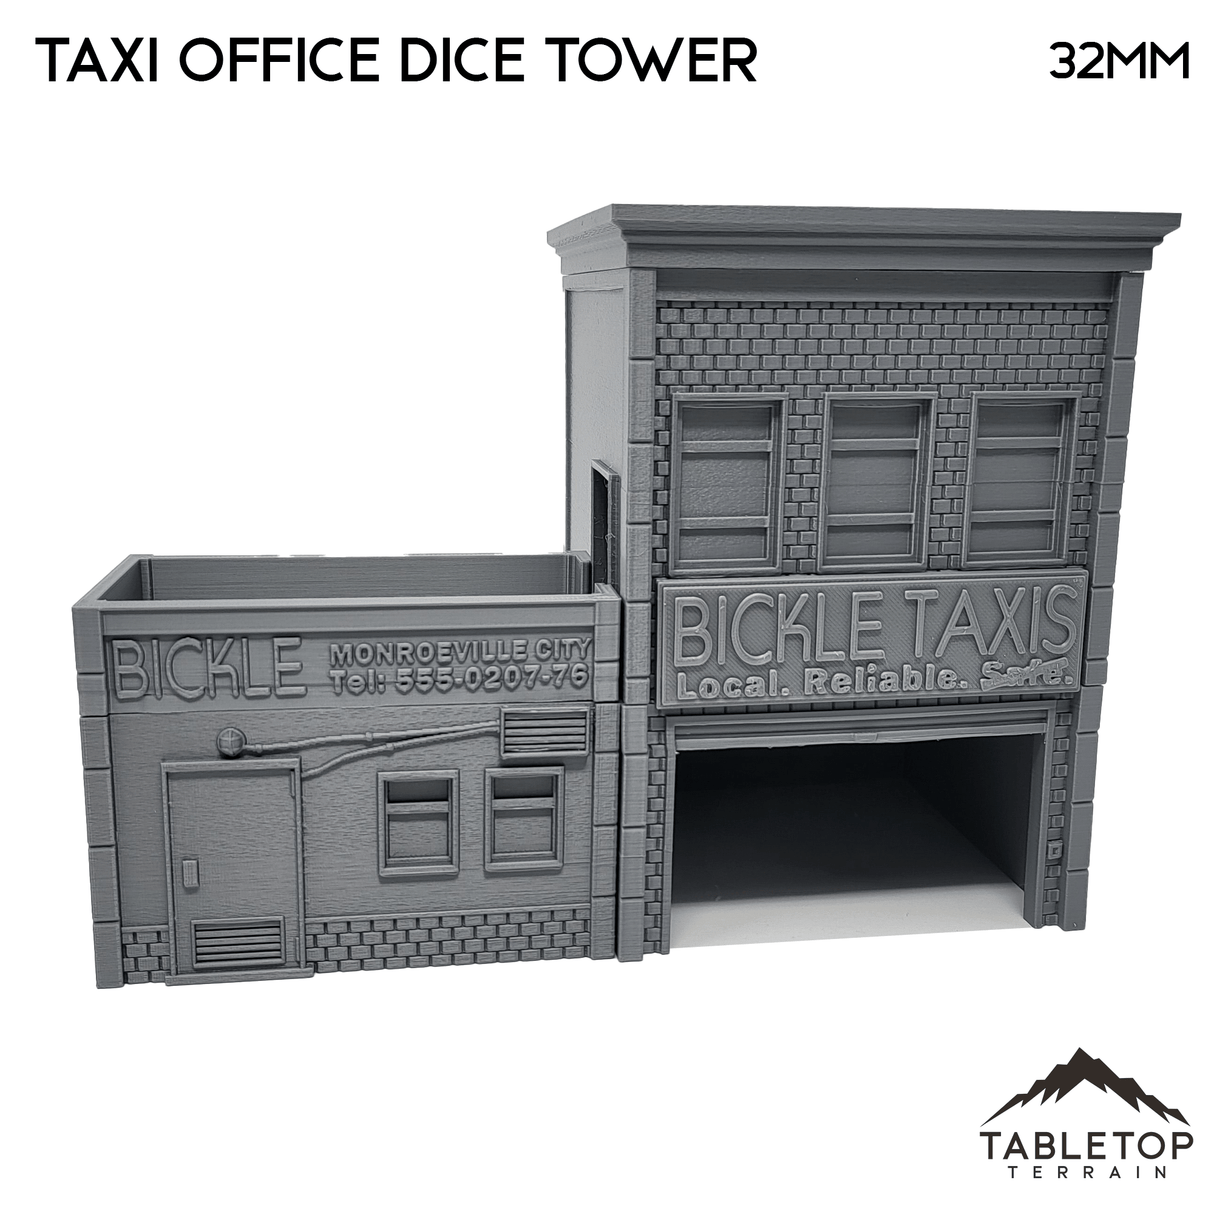 Tabletop Terrain Building Taxi Office - Dice Tower - Marvel Crisis Protocol Building